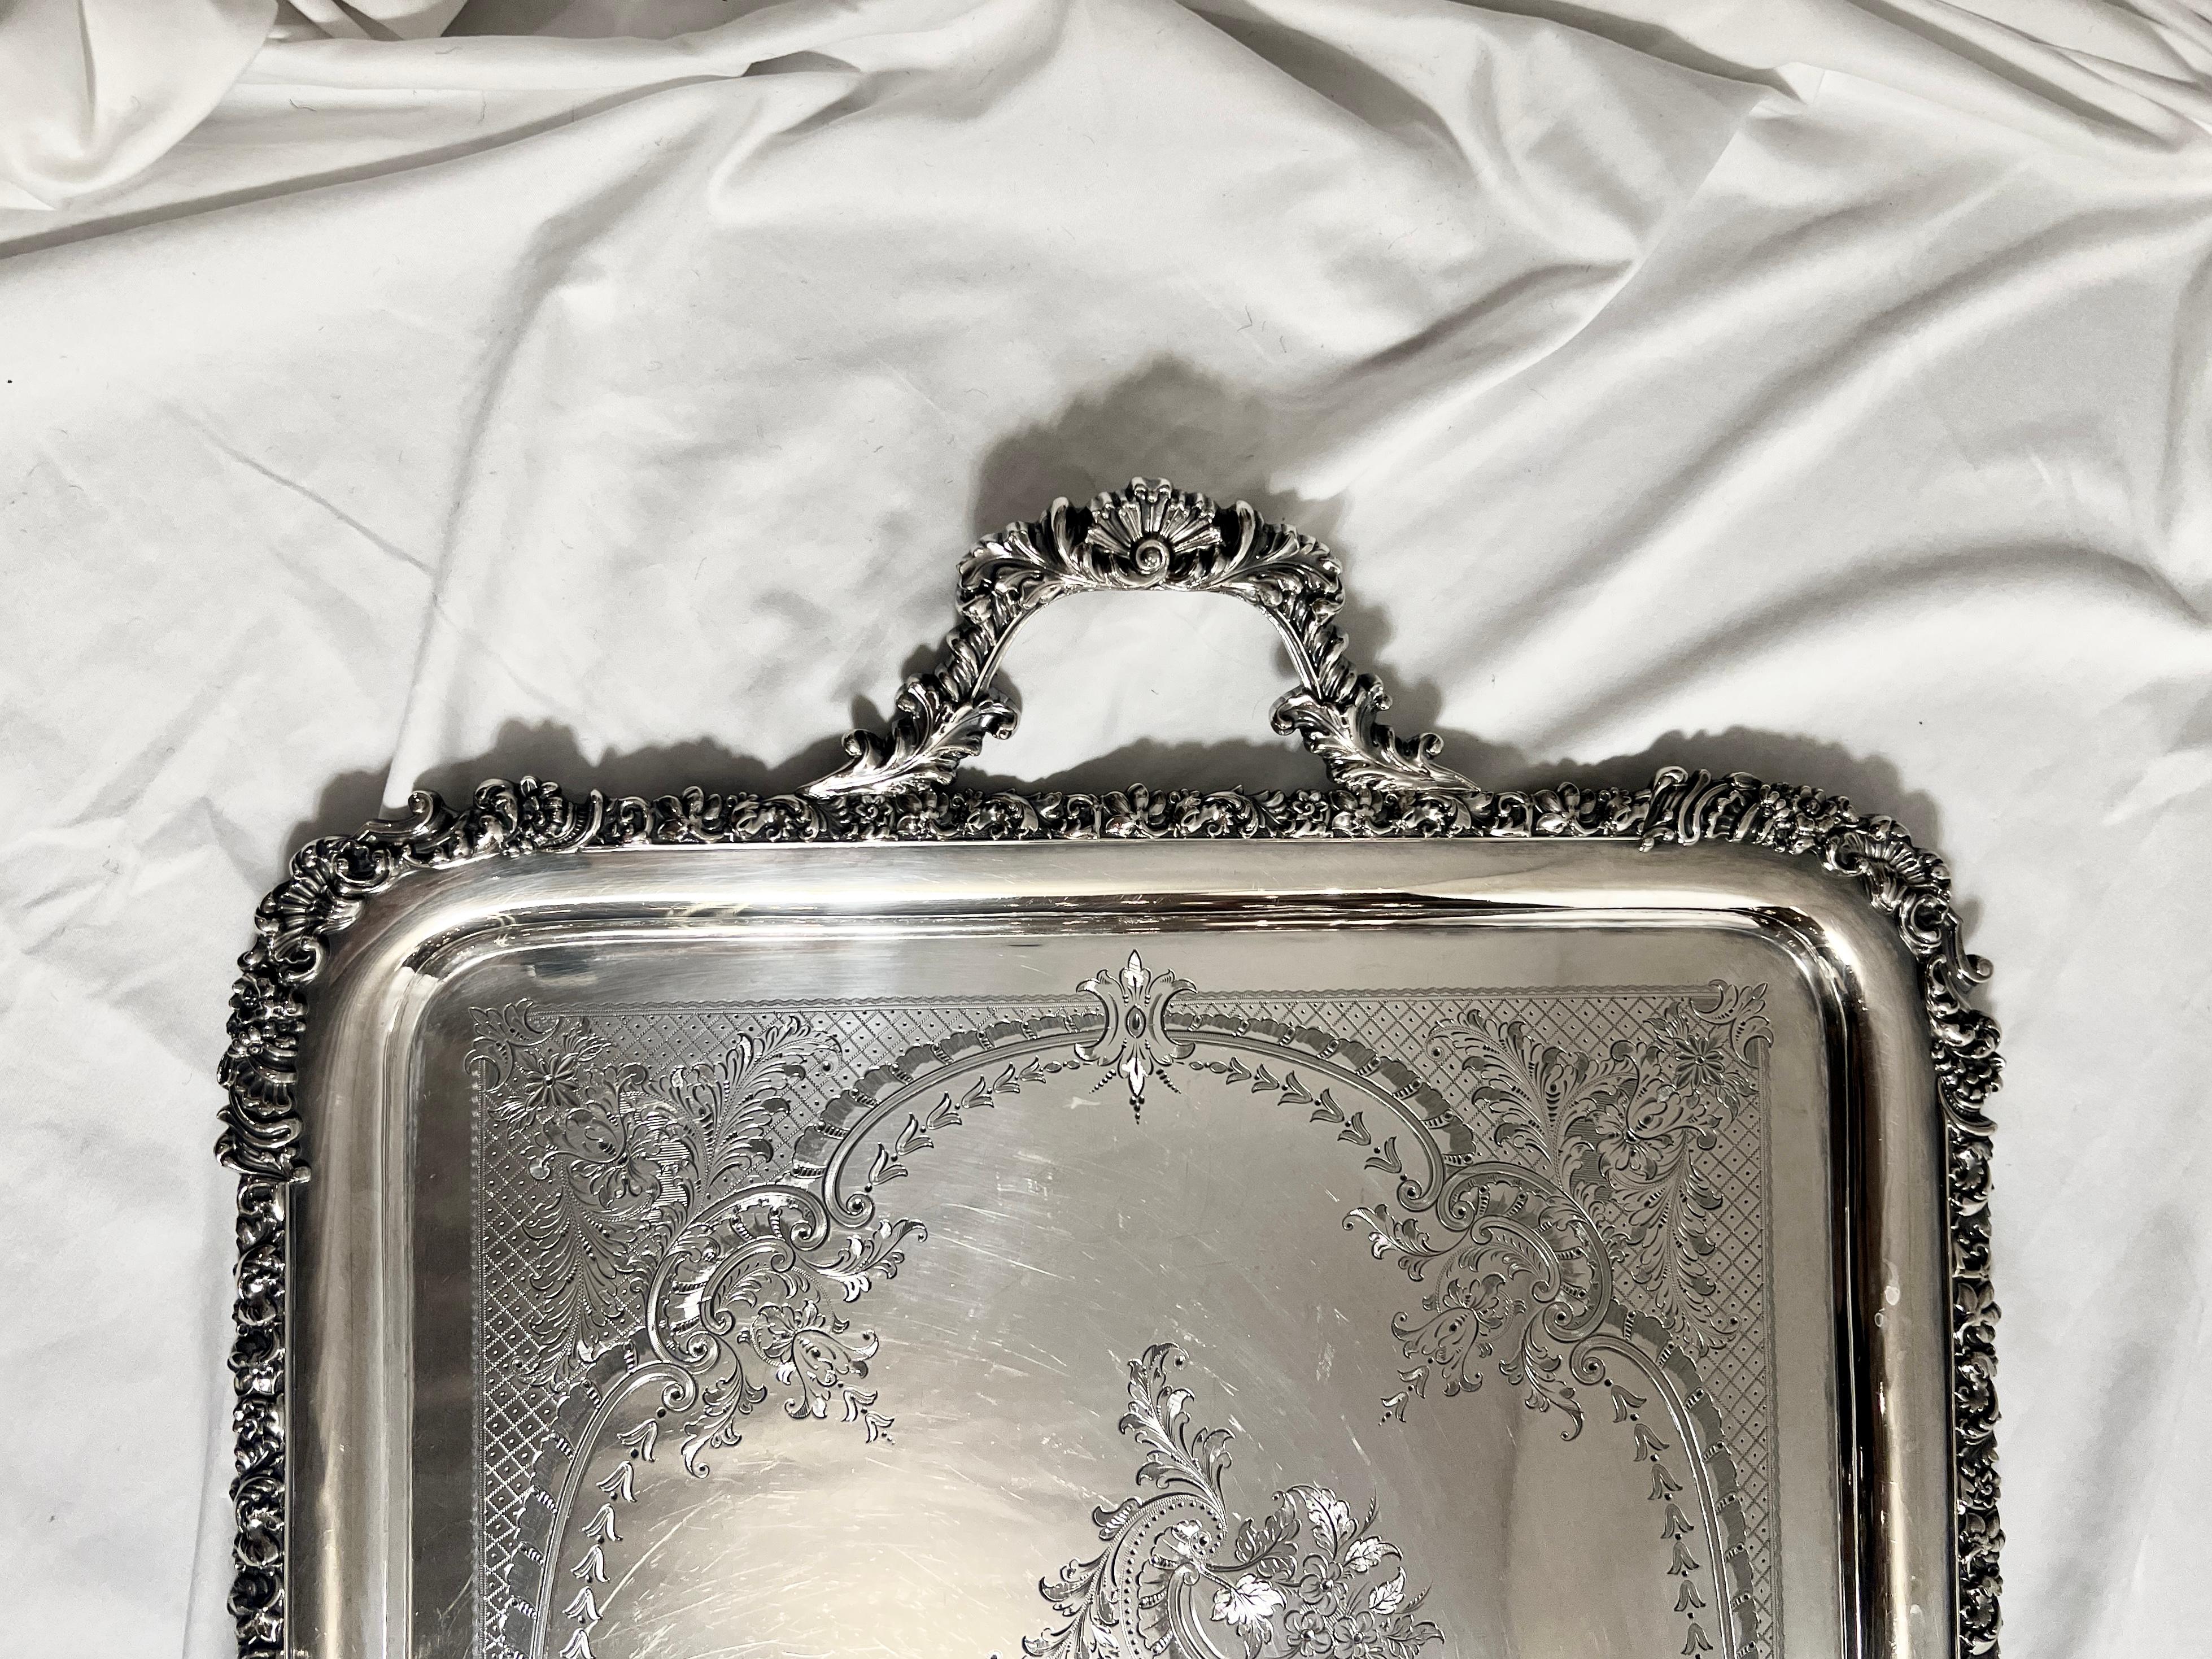 Antique exceptional quality silver plated service tray, circa 1885-1895.
With diamond engraving and rolled edge on tray.